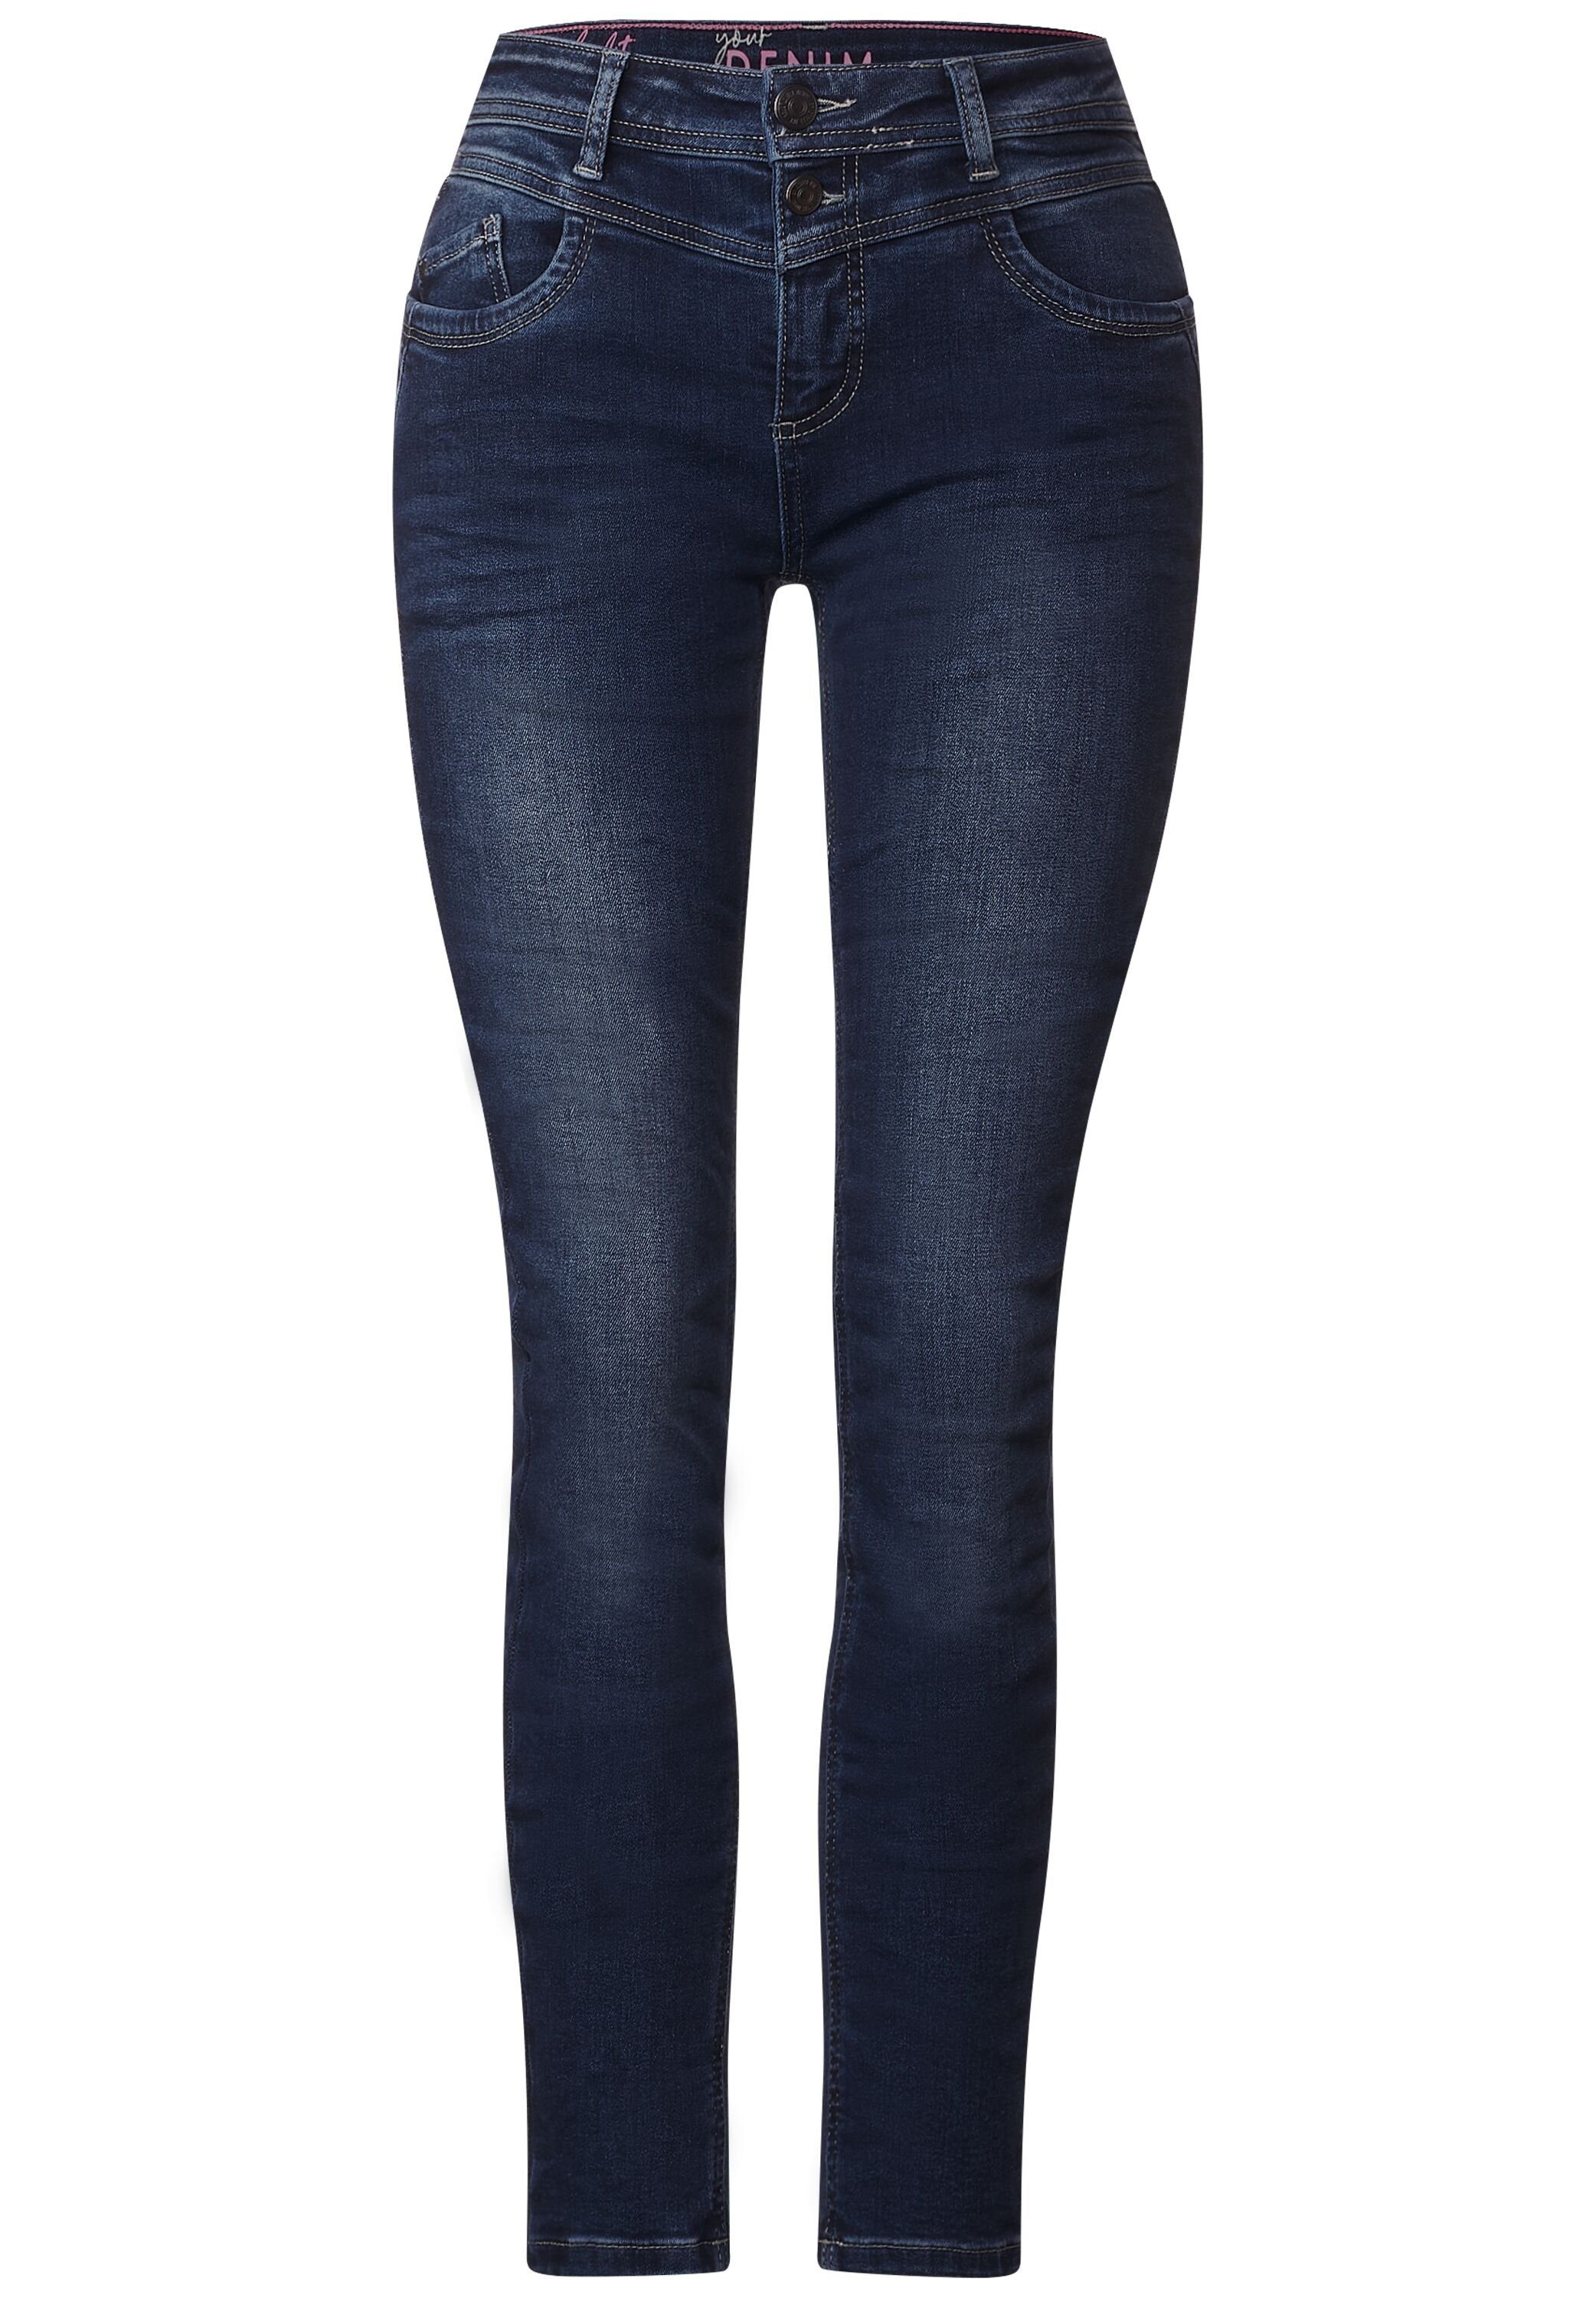 softer ONE Materialmix STREET Slim-fit-Jeans